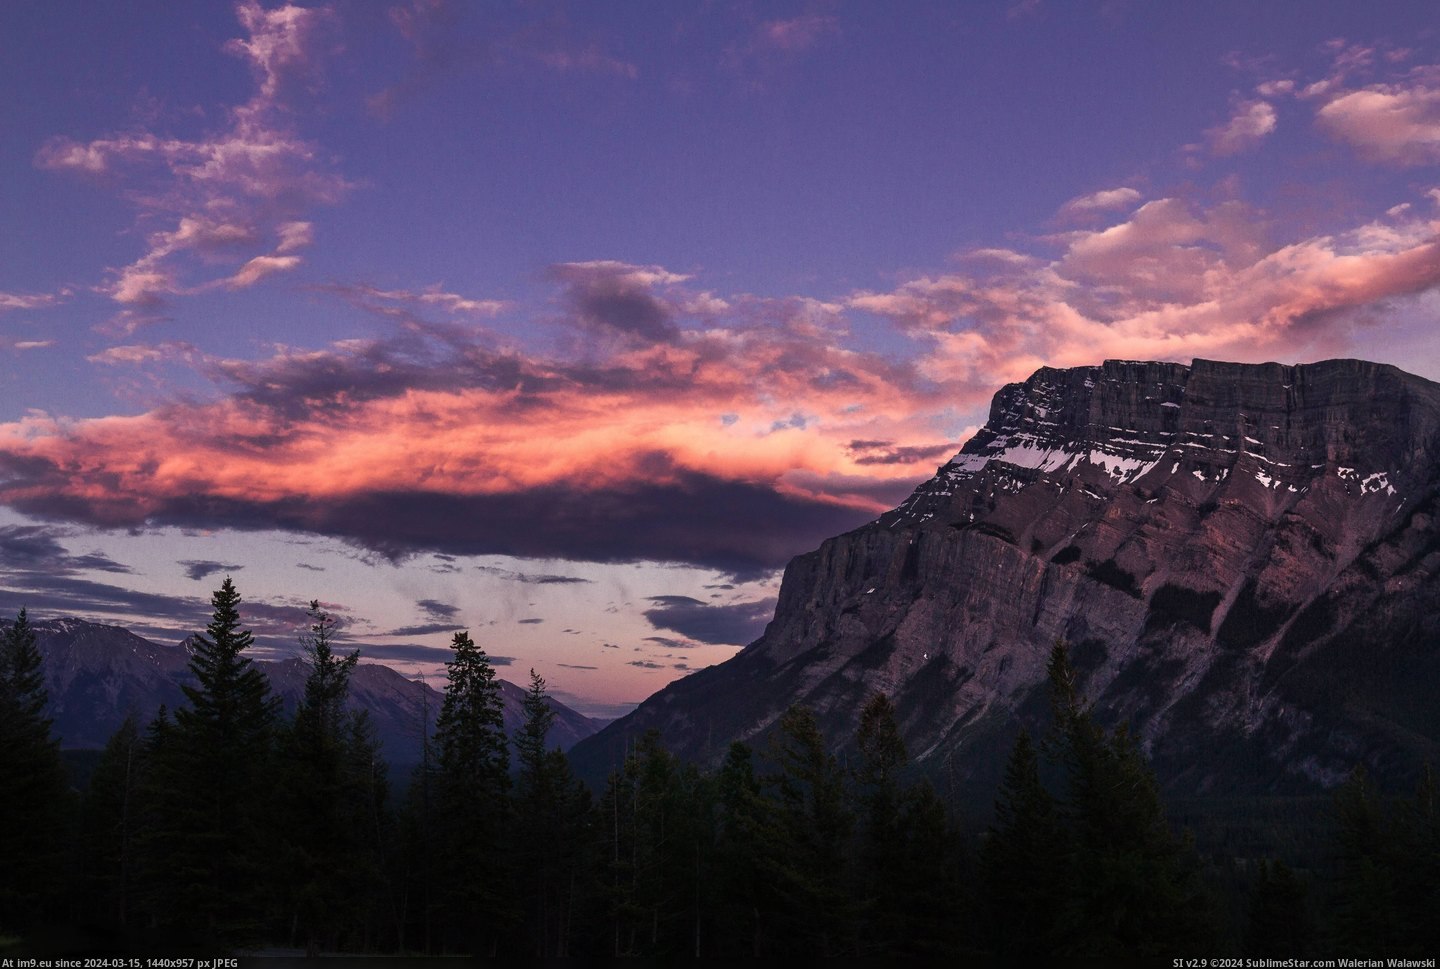 #Park #National #Canada #Mountain #Andrew #Rundle #Sunsets #Caitens #Photographer #Weird #5184x3456 #Banff [Earthporn] 10pm sunsets are weird. Rundle Mountain, Banff National Park, Canada. [5184x3456] Photographer: Andrew Caitens Pic. (Image of album My r/EARTHPORN favs))